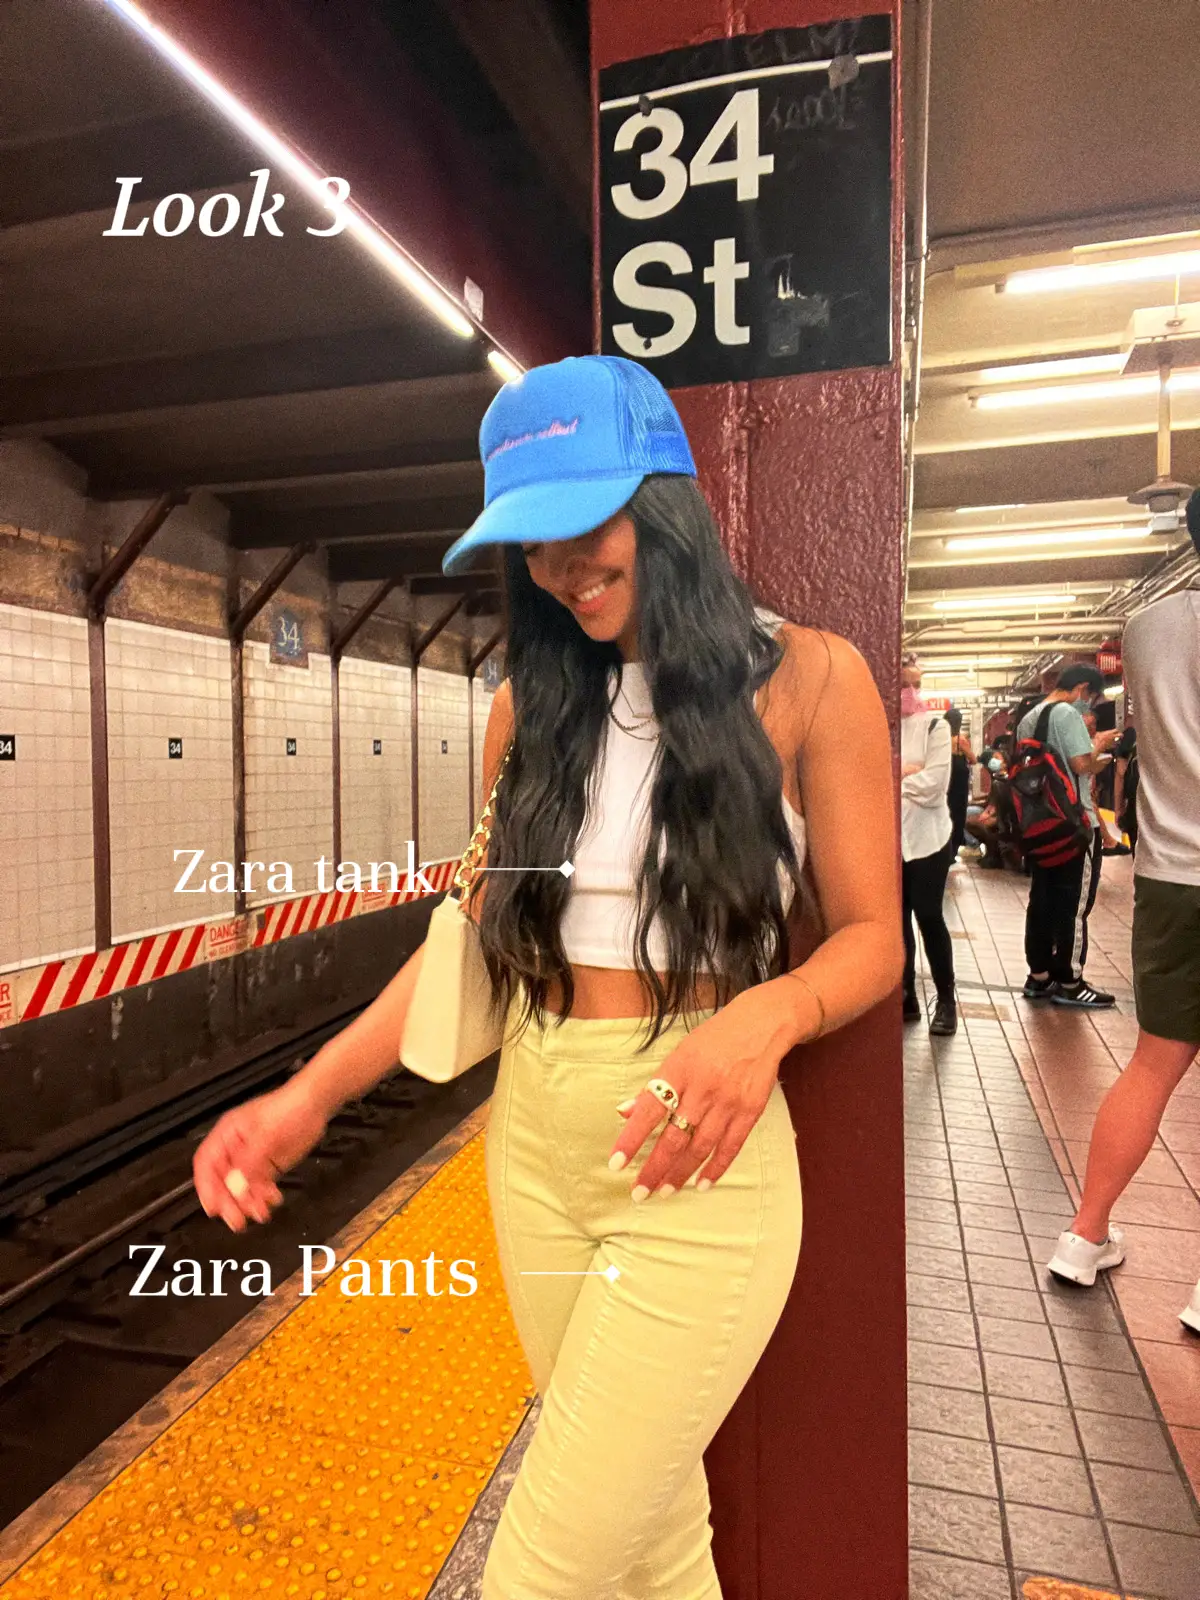  A woman wearing a blue hat and a grey shirt is standing next to a subway train. She is wearing a blue hat and jeans.